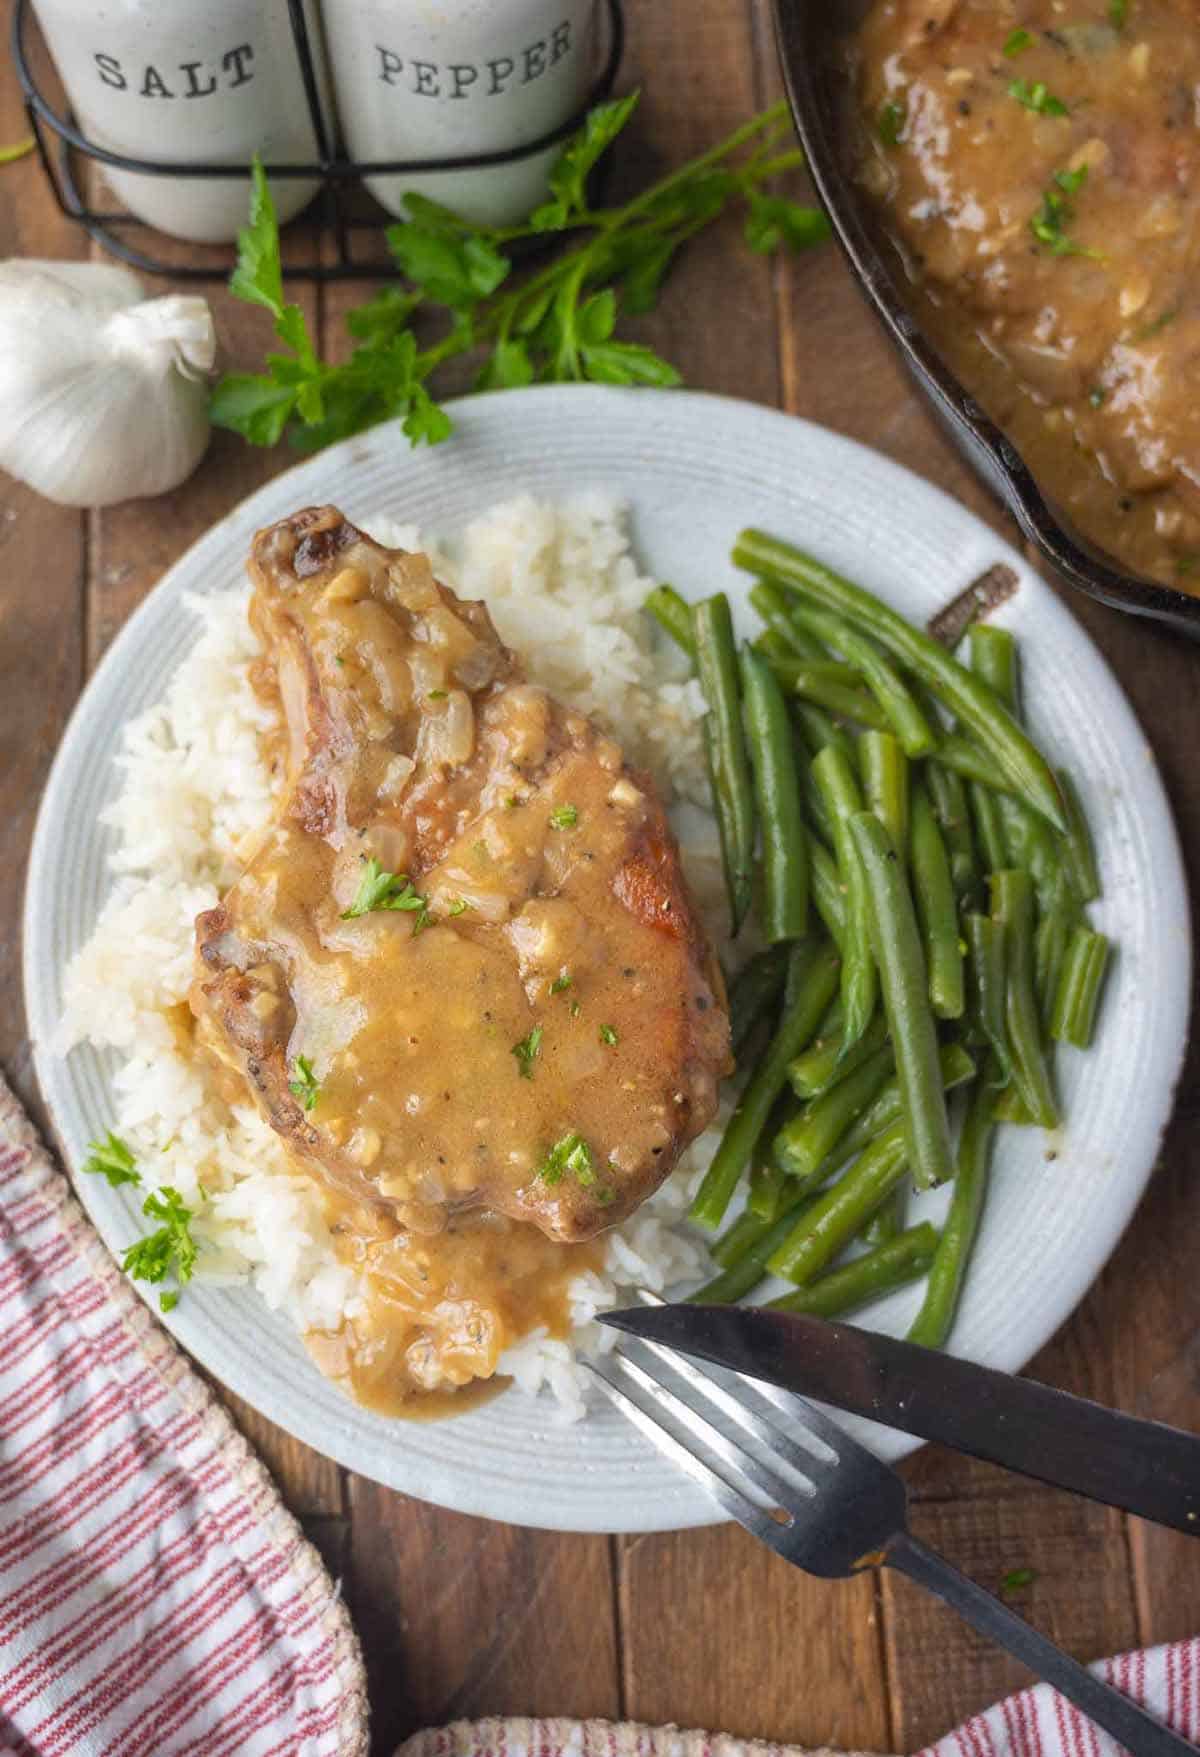 Smothered pork chop placed on some white rice with green beans.